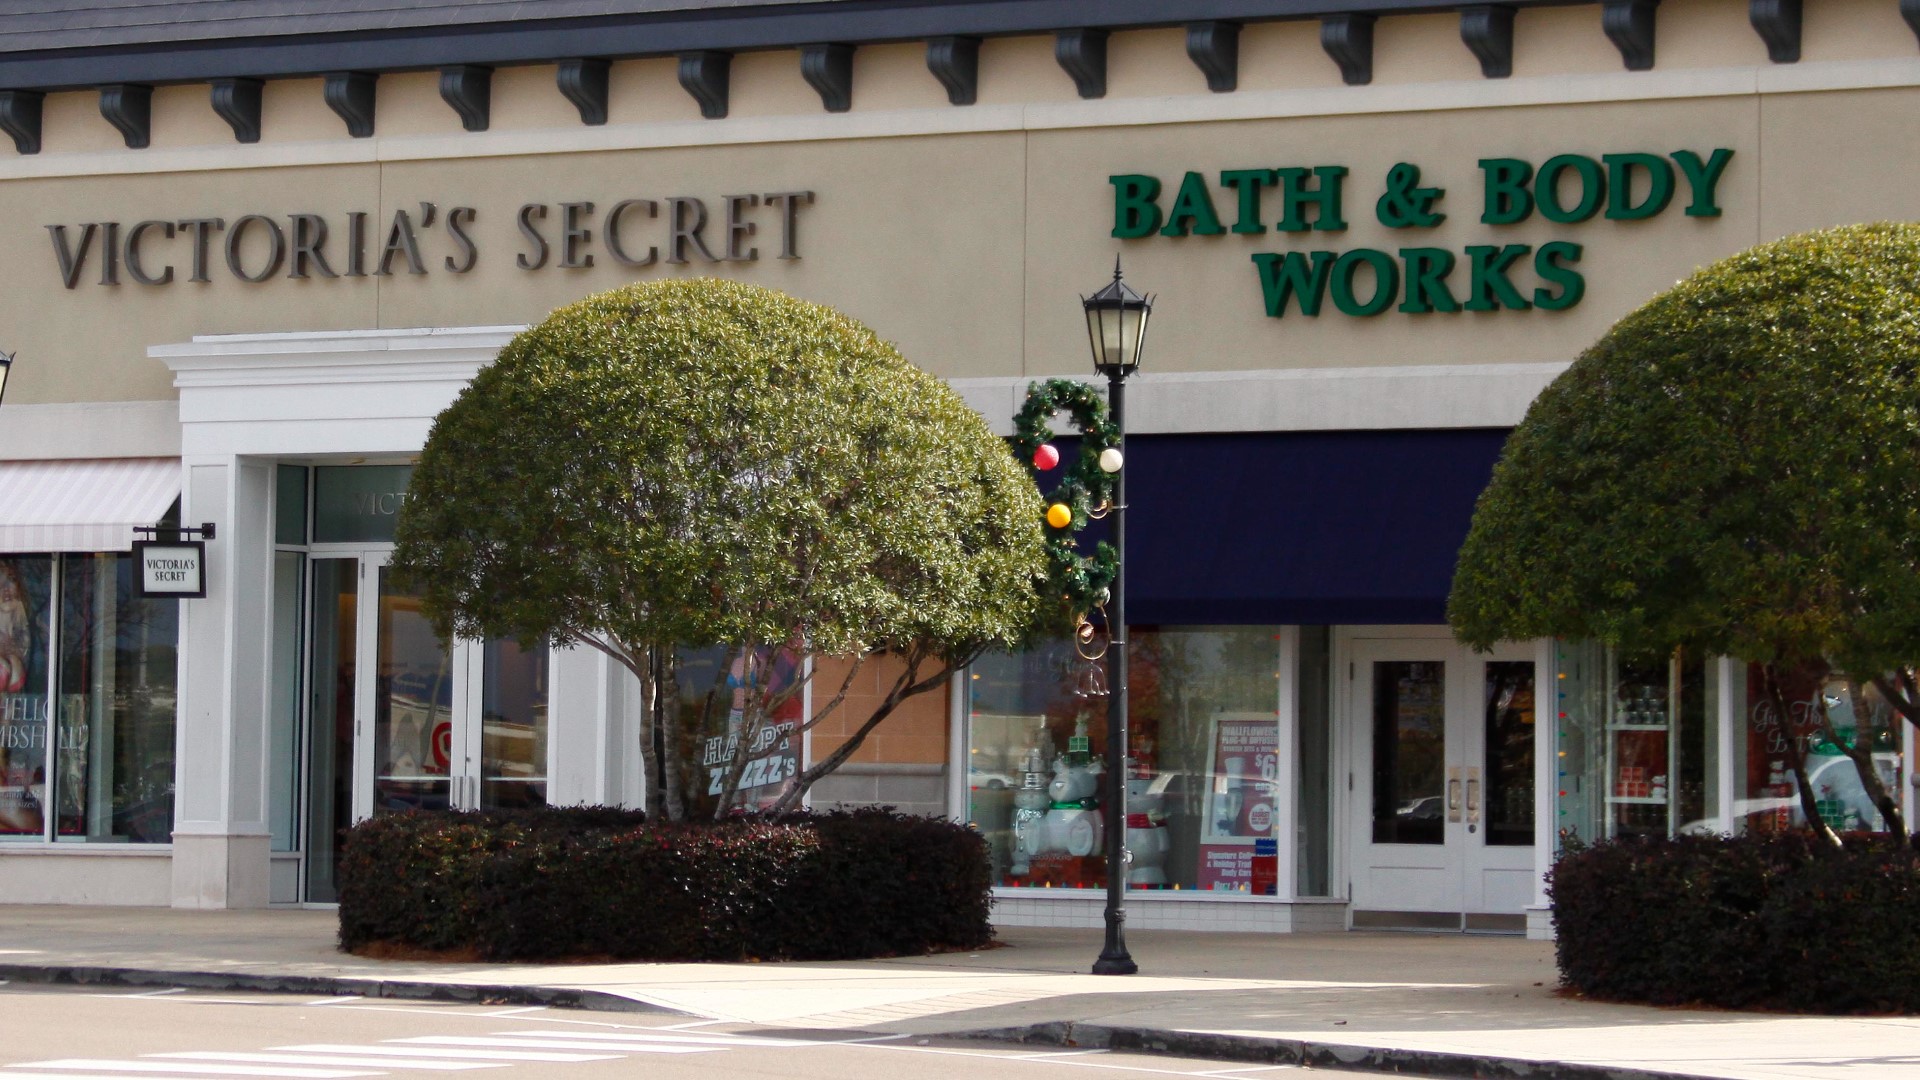 Bath & Body Works has announced that it will be cutting about 130 jobs after a recent decrease in sales within the company.